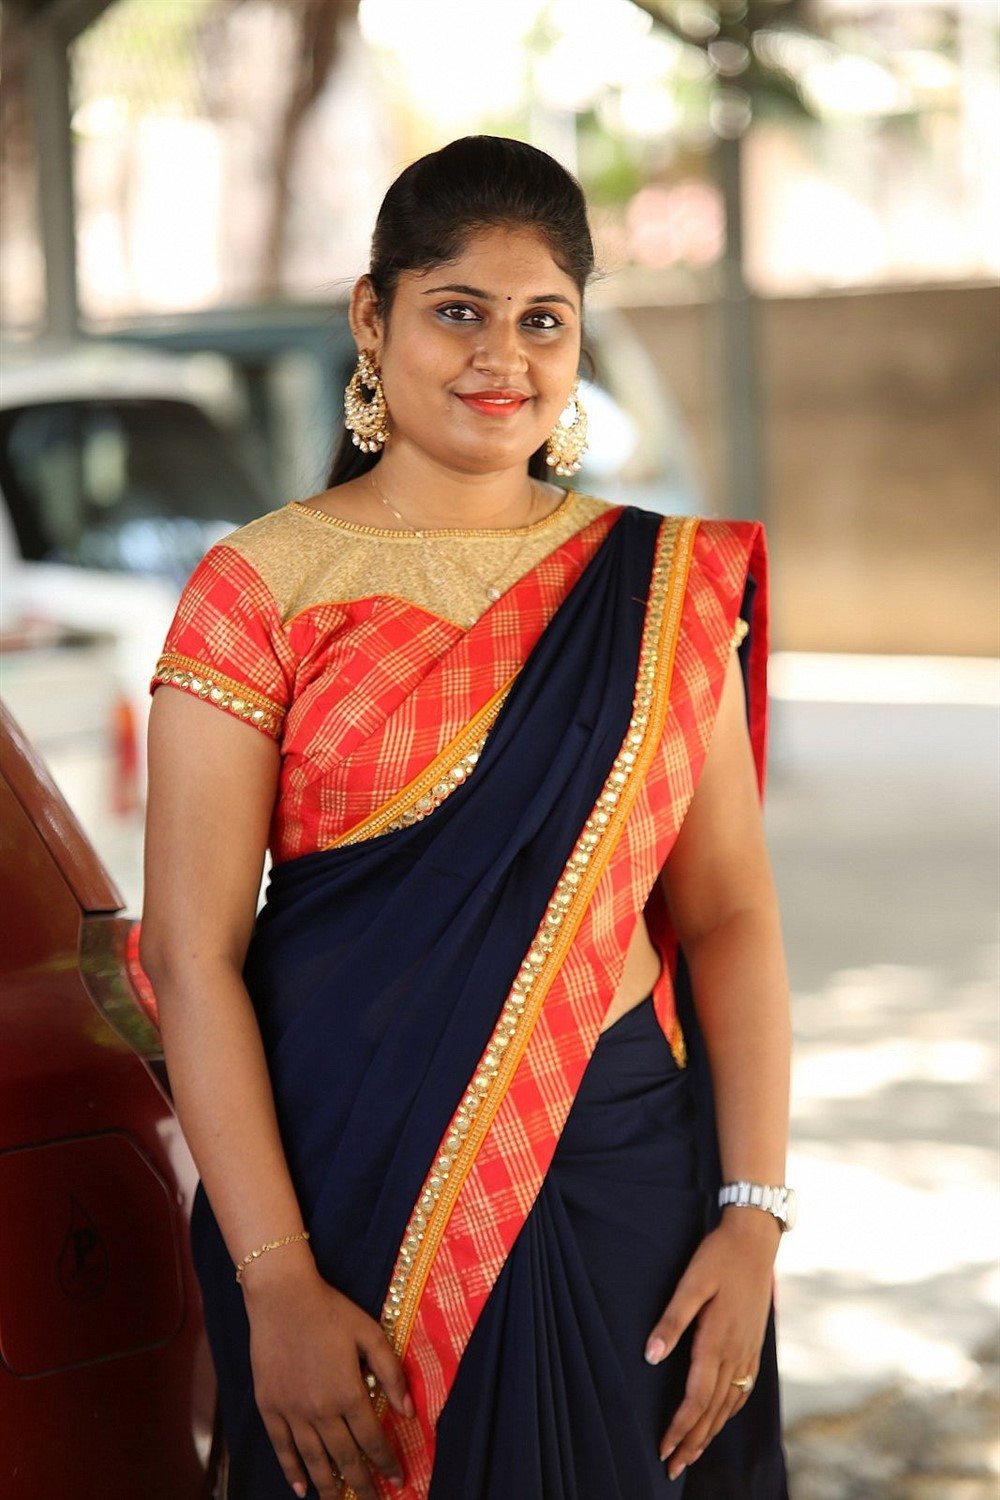 Anchor Sonia Chowdary in Saree Photos | Moviegalleri.net